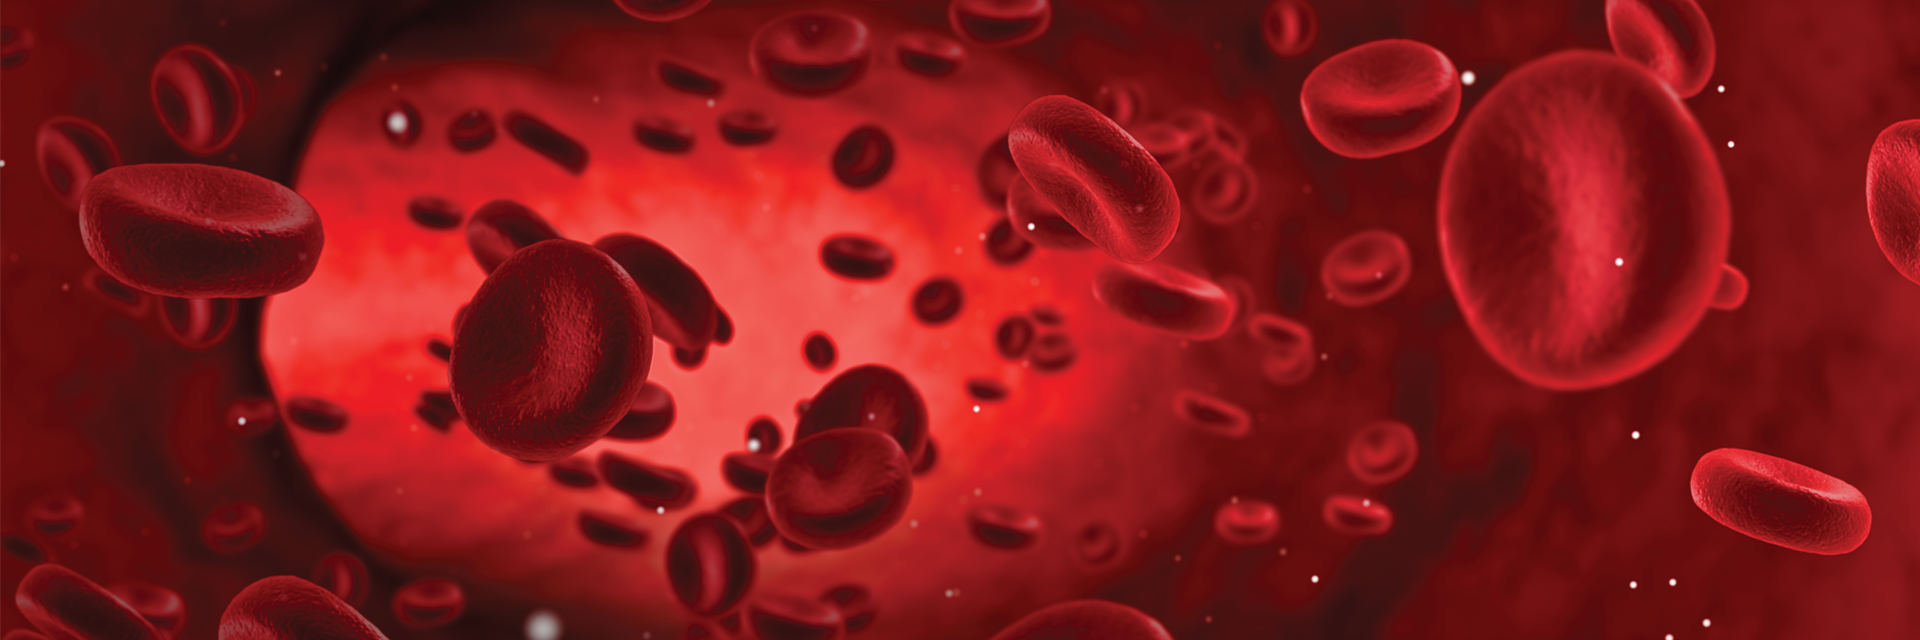 illustration of red blood cells moving through a blood vessel